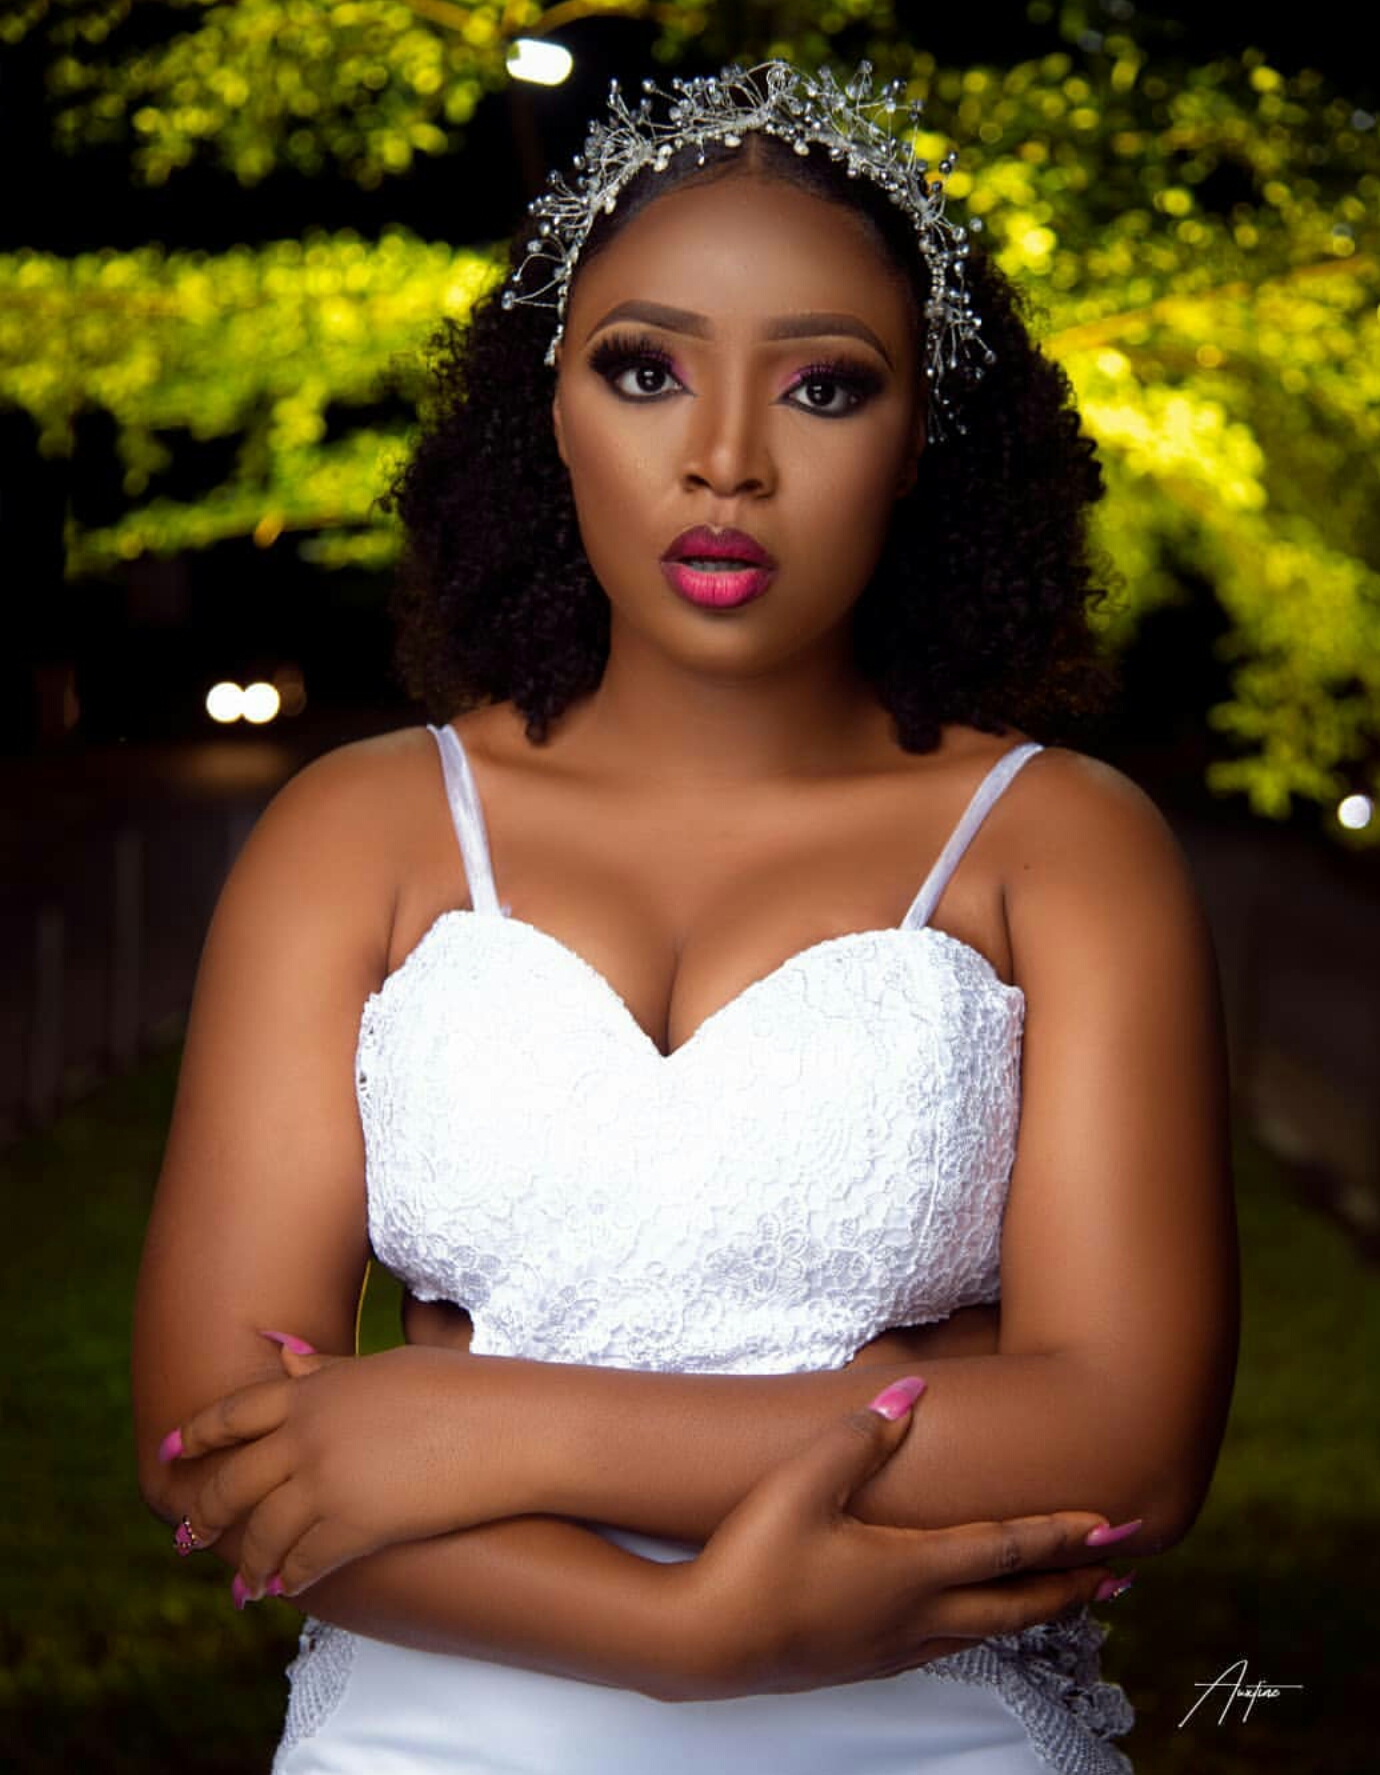 Angel Palazzo dazzles in new photos as she celebrates her birthday